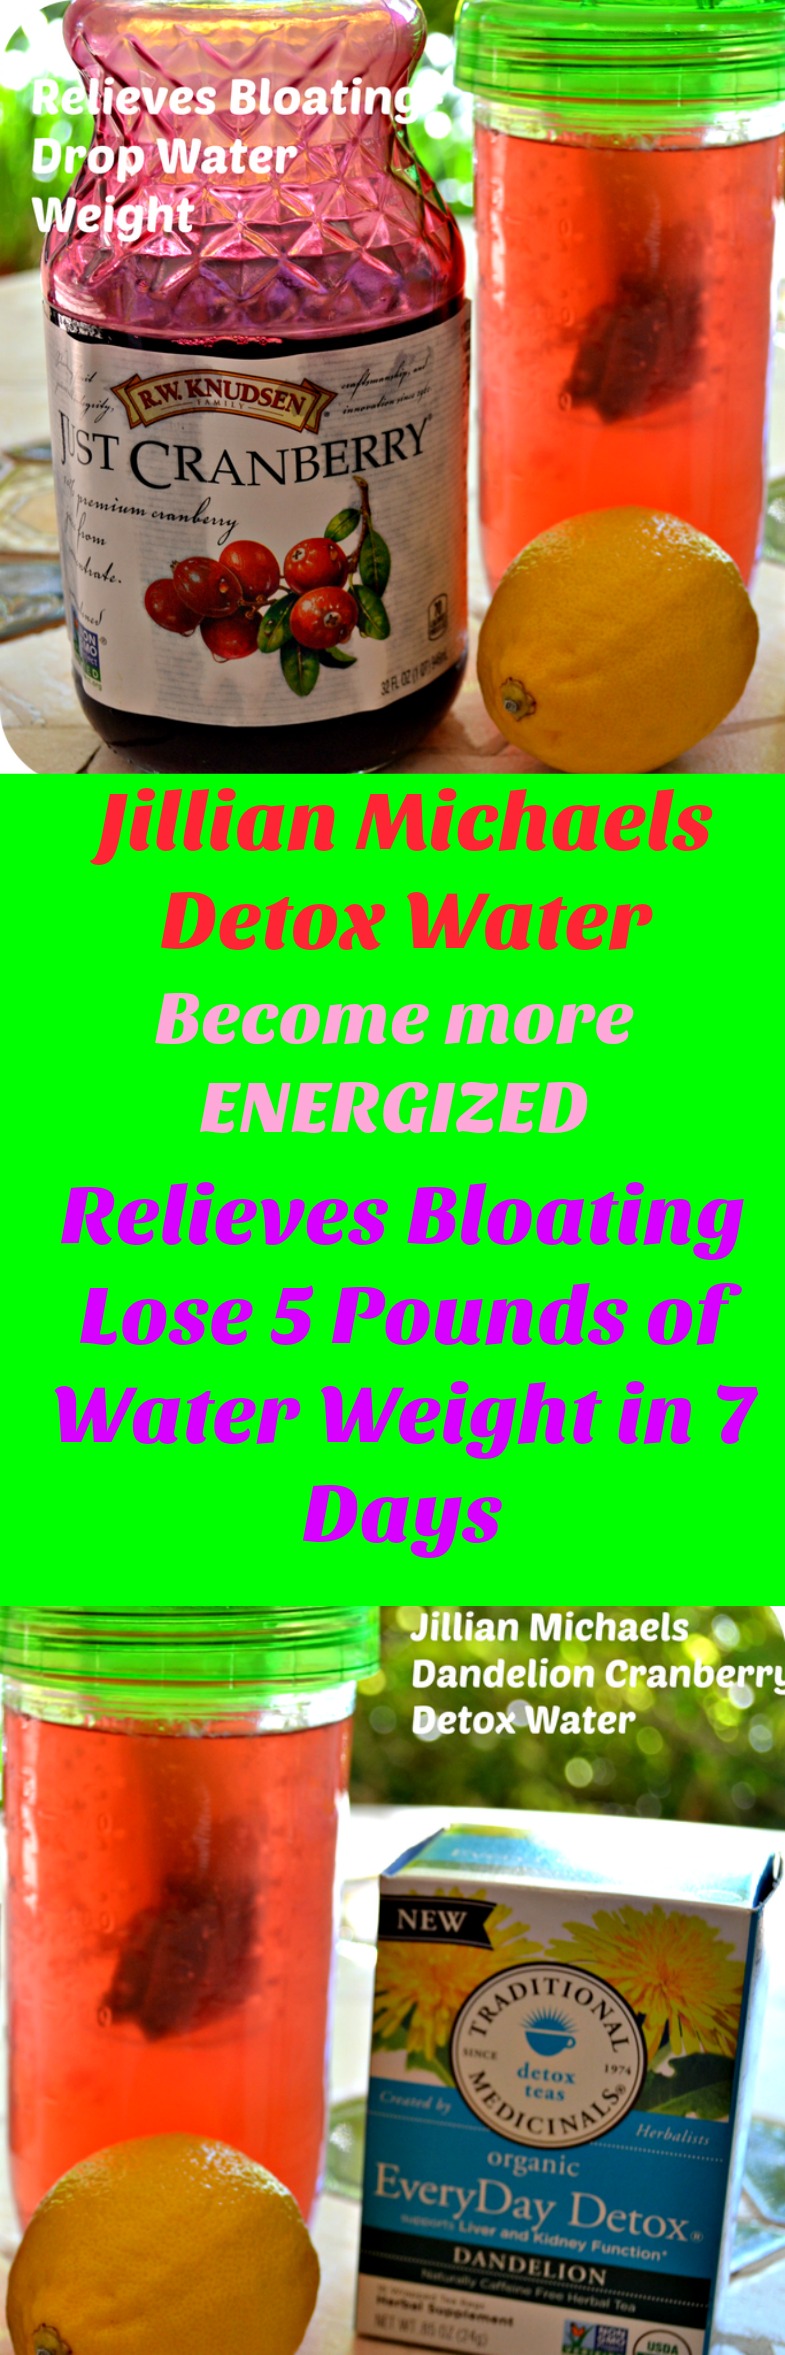 Jillian Michaels 7 Day Detox Water. Lose 5 pounds of water weight in 7 days. 